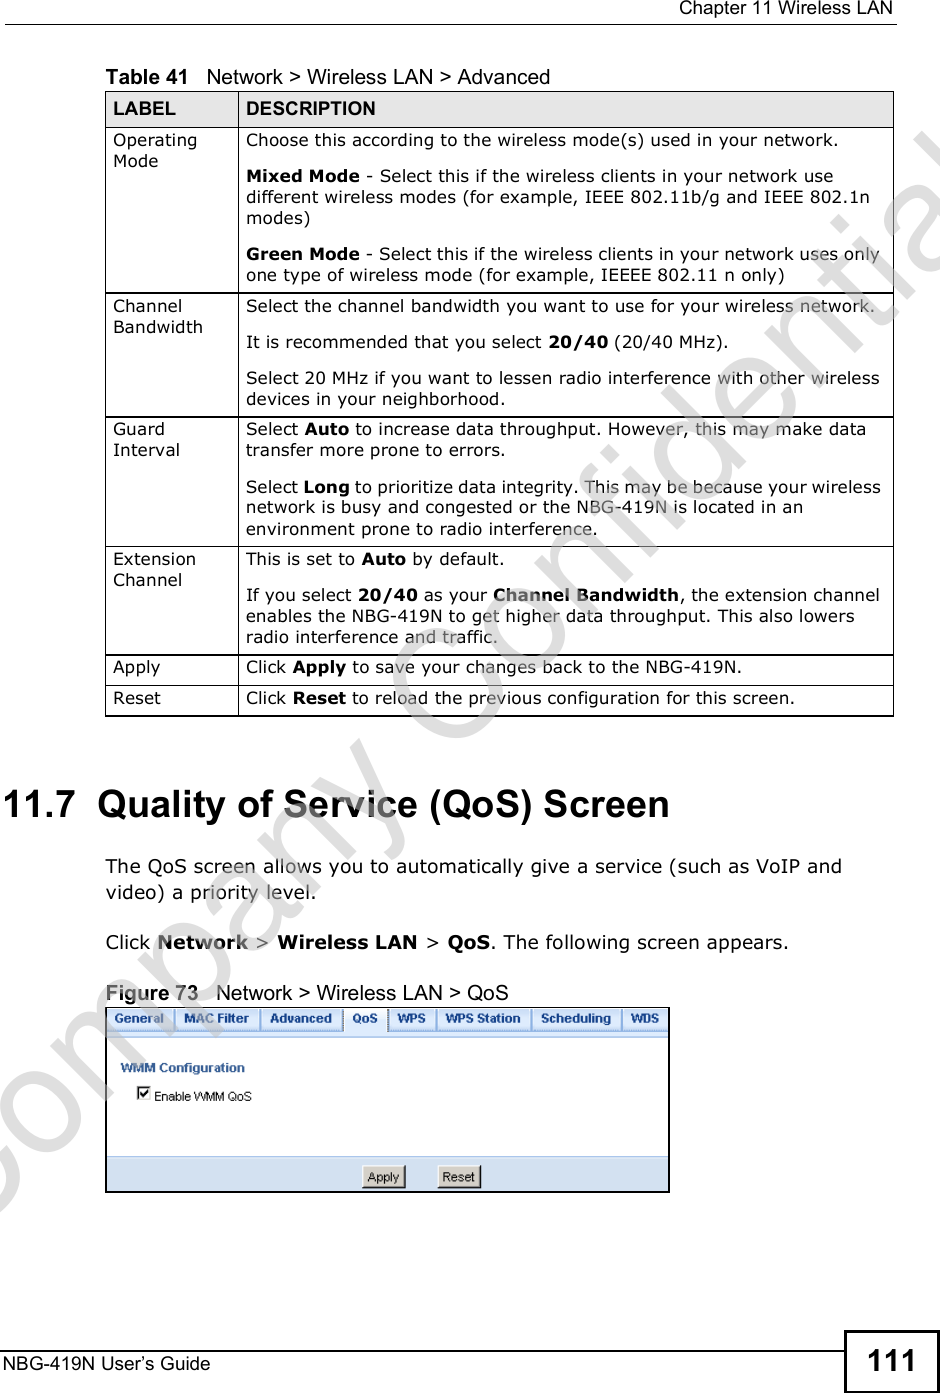  Chapter 11Wireless LANNBG-419N User s Guide 11111.7  Quality of Service (QoS) ScreenThe QoS screen allows you to automatically give a service (such as VoIP and video) a priority level.Click Network &gt; Wireless LAN &gt; QoS. The following screen appears.Figure 73   Network &gt; Wireless LAN &gt; QoS Operating ModeChoose this according to the wireless mode(s) used in your network.Mixed Mode - Select this if the wireless clients in your network use different wireless modes (for example, IEEE 802.11b/g and IEEE 802.1n modes)Green Mode - Select this if the wireless clients in your network uses only one type of wireless mode (for example, IEEEE 802.11 n only)Channel BandwidthSelect the channel bandwidth you want to use for your wireless network.It is recommended that you select 20/40 (20/40 MHz). Select 20 MHz if you want to lessen radio interference with other wireless devices in your neighborhood.Guard IntervalSelect Auto to increase data throughput. However, this may make data transfer more prone to errors.Select Long to prioritize data integrity. This may be because your wireless network is busy and congested or the NBG-419N is located in an environment prone to radio interference.Extension ChannelThis is set to Auto by default. If you select 20/40 as your Channel Bandwidth, the extension channel enables the NBG-419N to get higher data throughput. This also lowers radio interference and traffic.Apply Click Apply to save your changes back to the NBG-419N.Reset Click Reset to reload the previous configuration for this screen.Table 41   Network &gt; Wireless LAN &gt; AdvancedLABEL DESCRIPTIONCompany Confidential